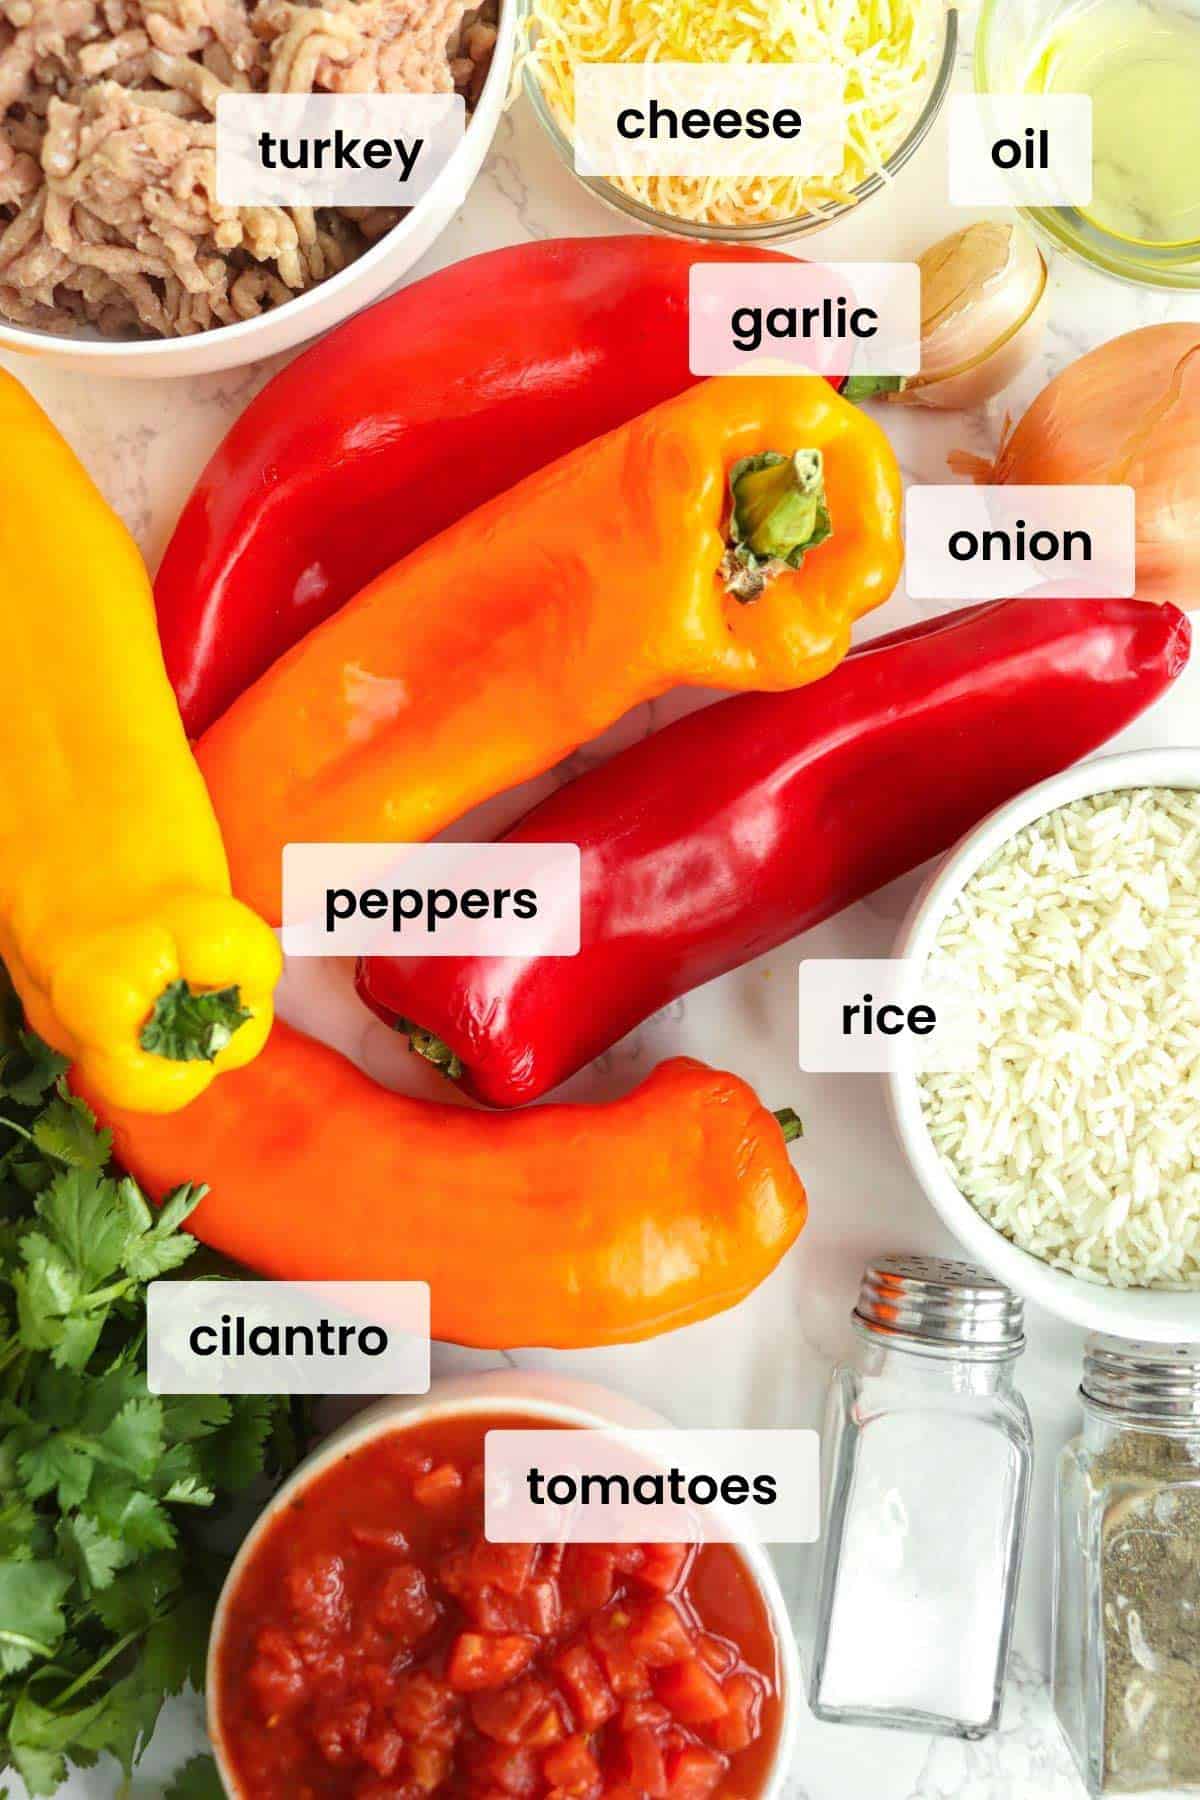 ingredients for stuffed turkey peppers.